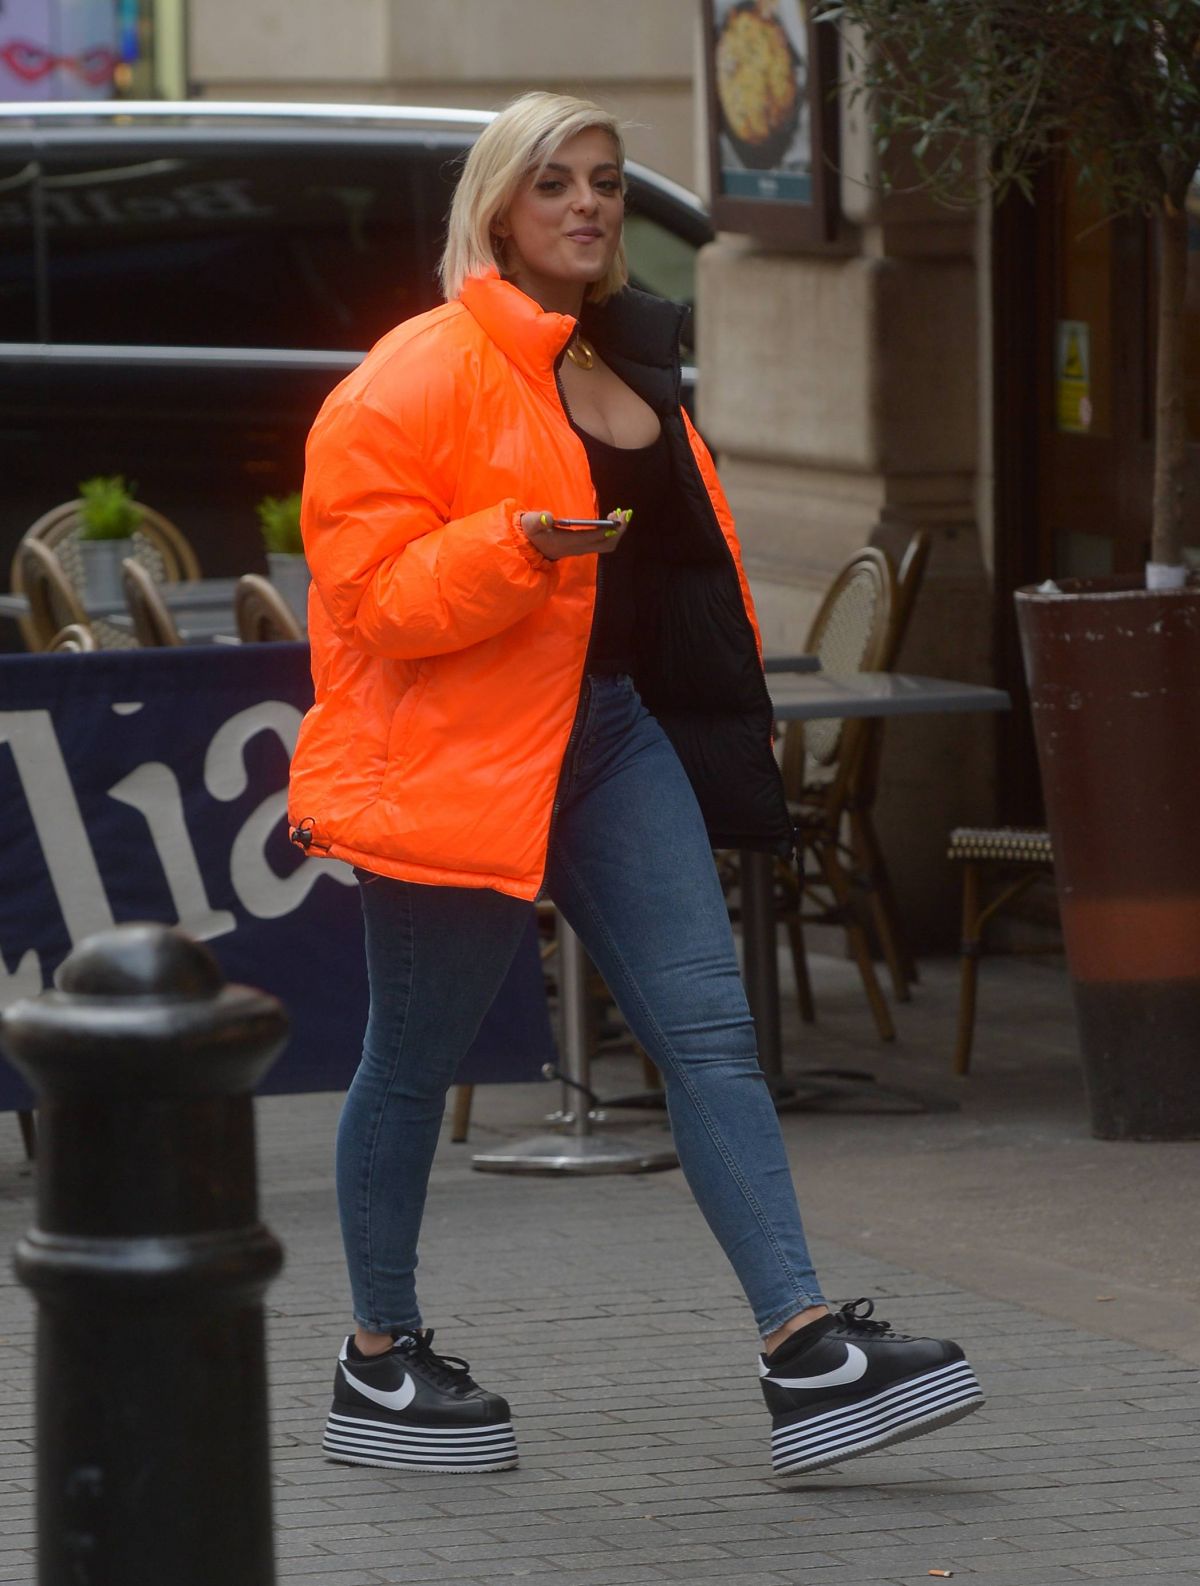 bebe-rexha-out-and-about-in-london-04-04-2019-7.jpg